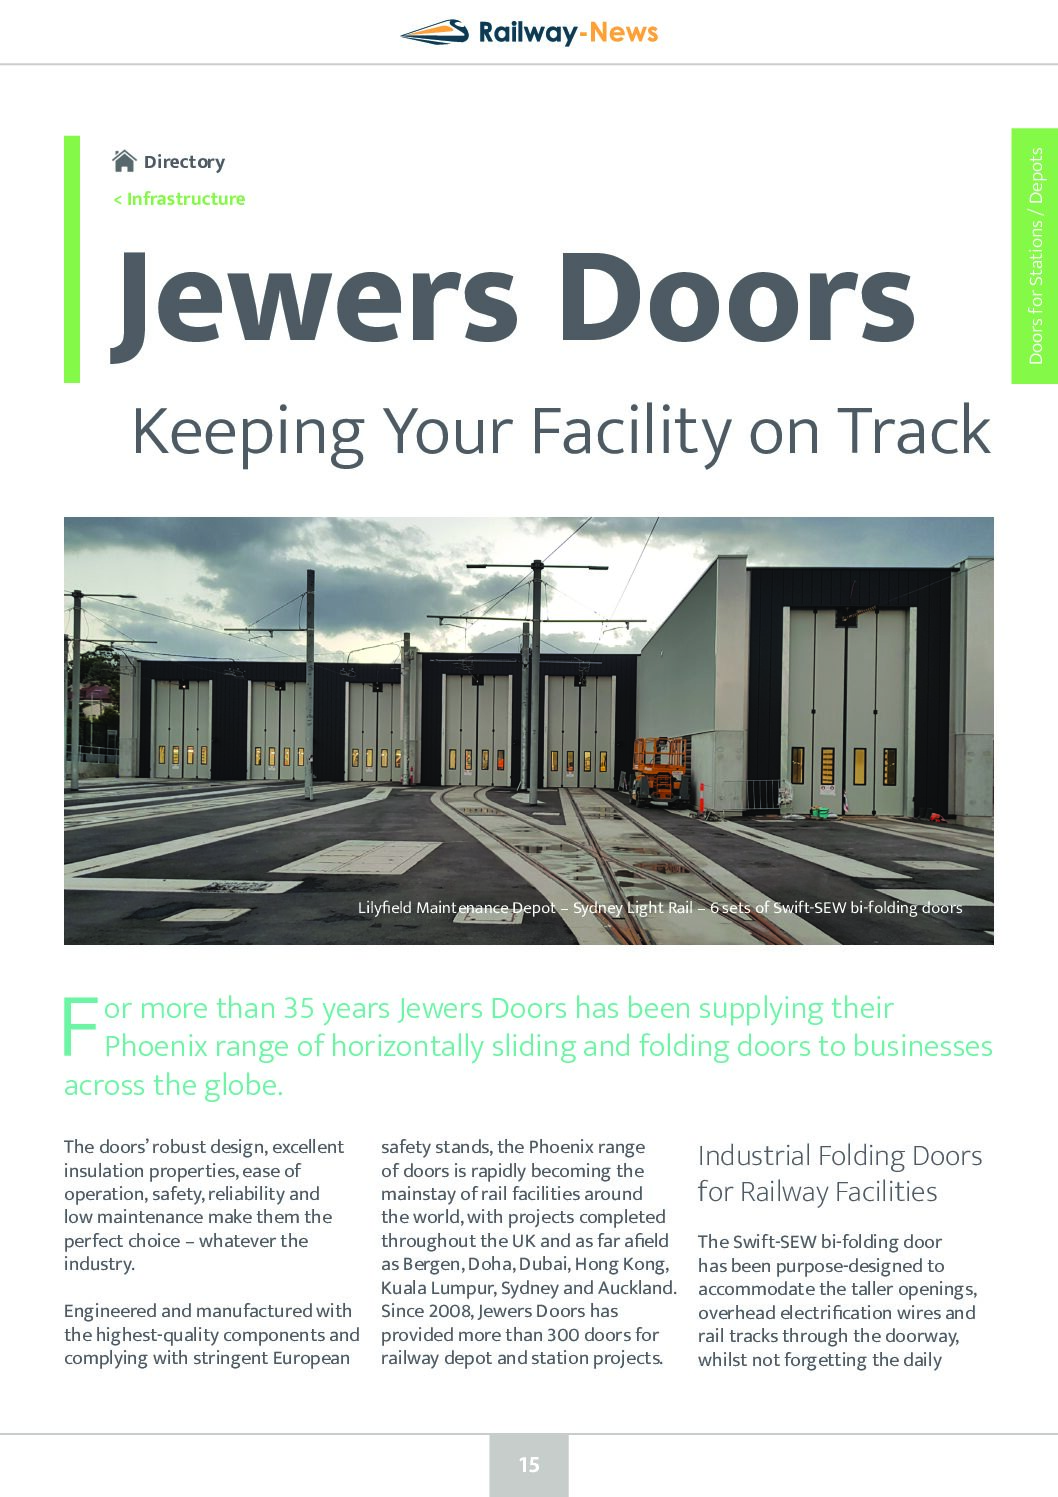 Keeping Your Facility on Track